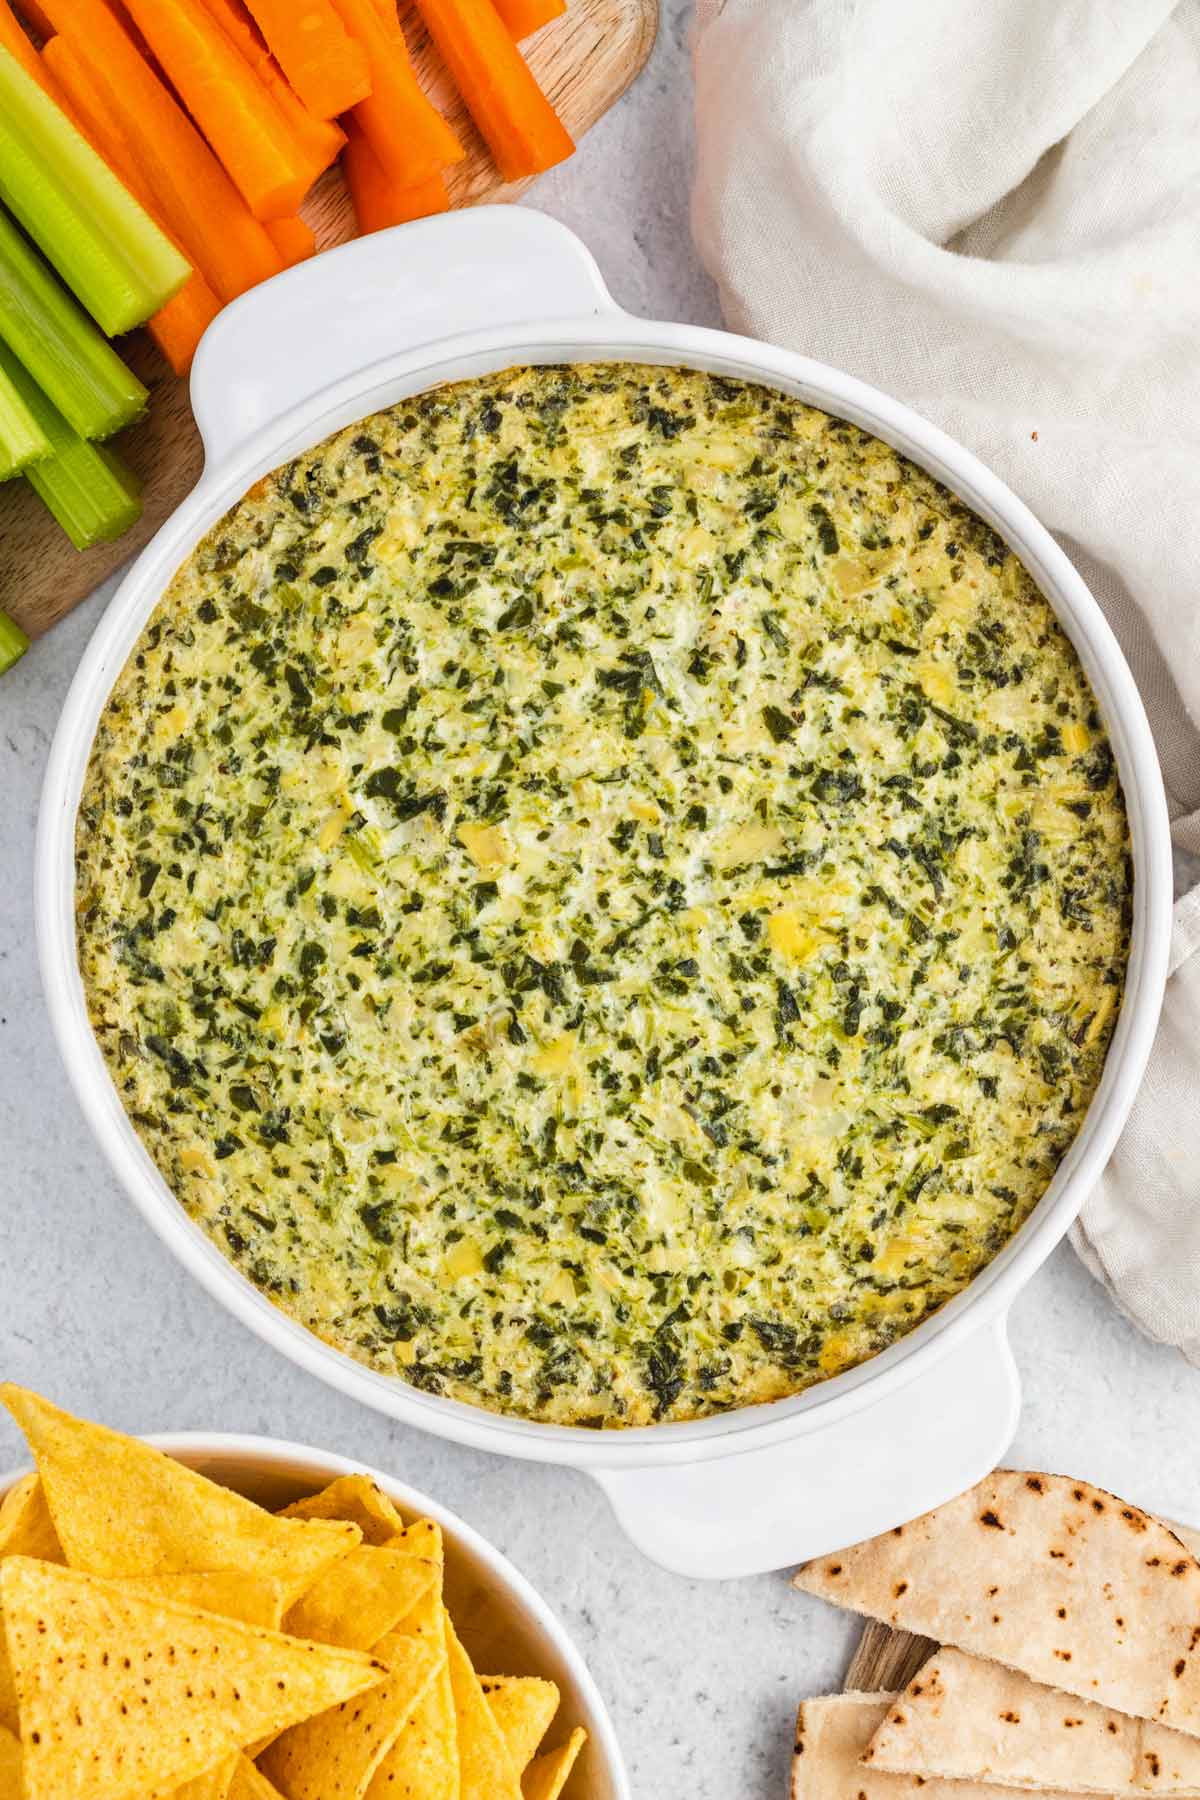 the baked dip.